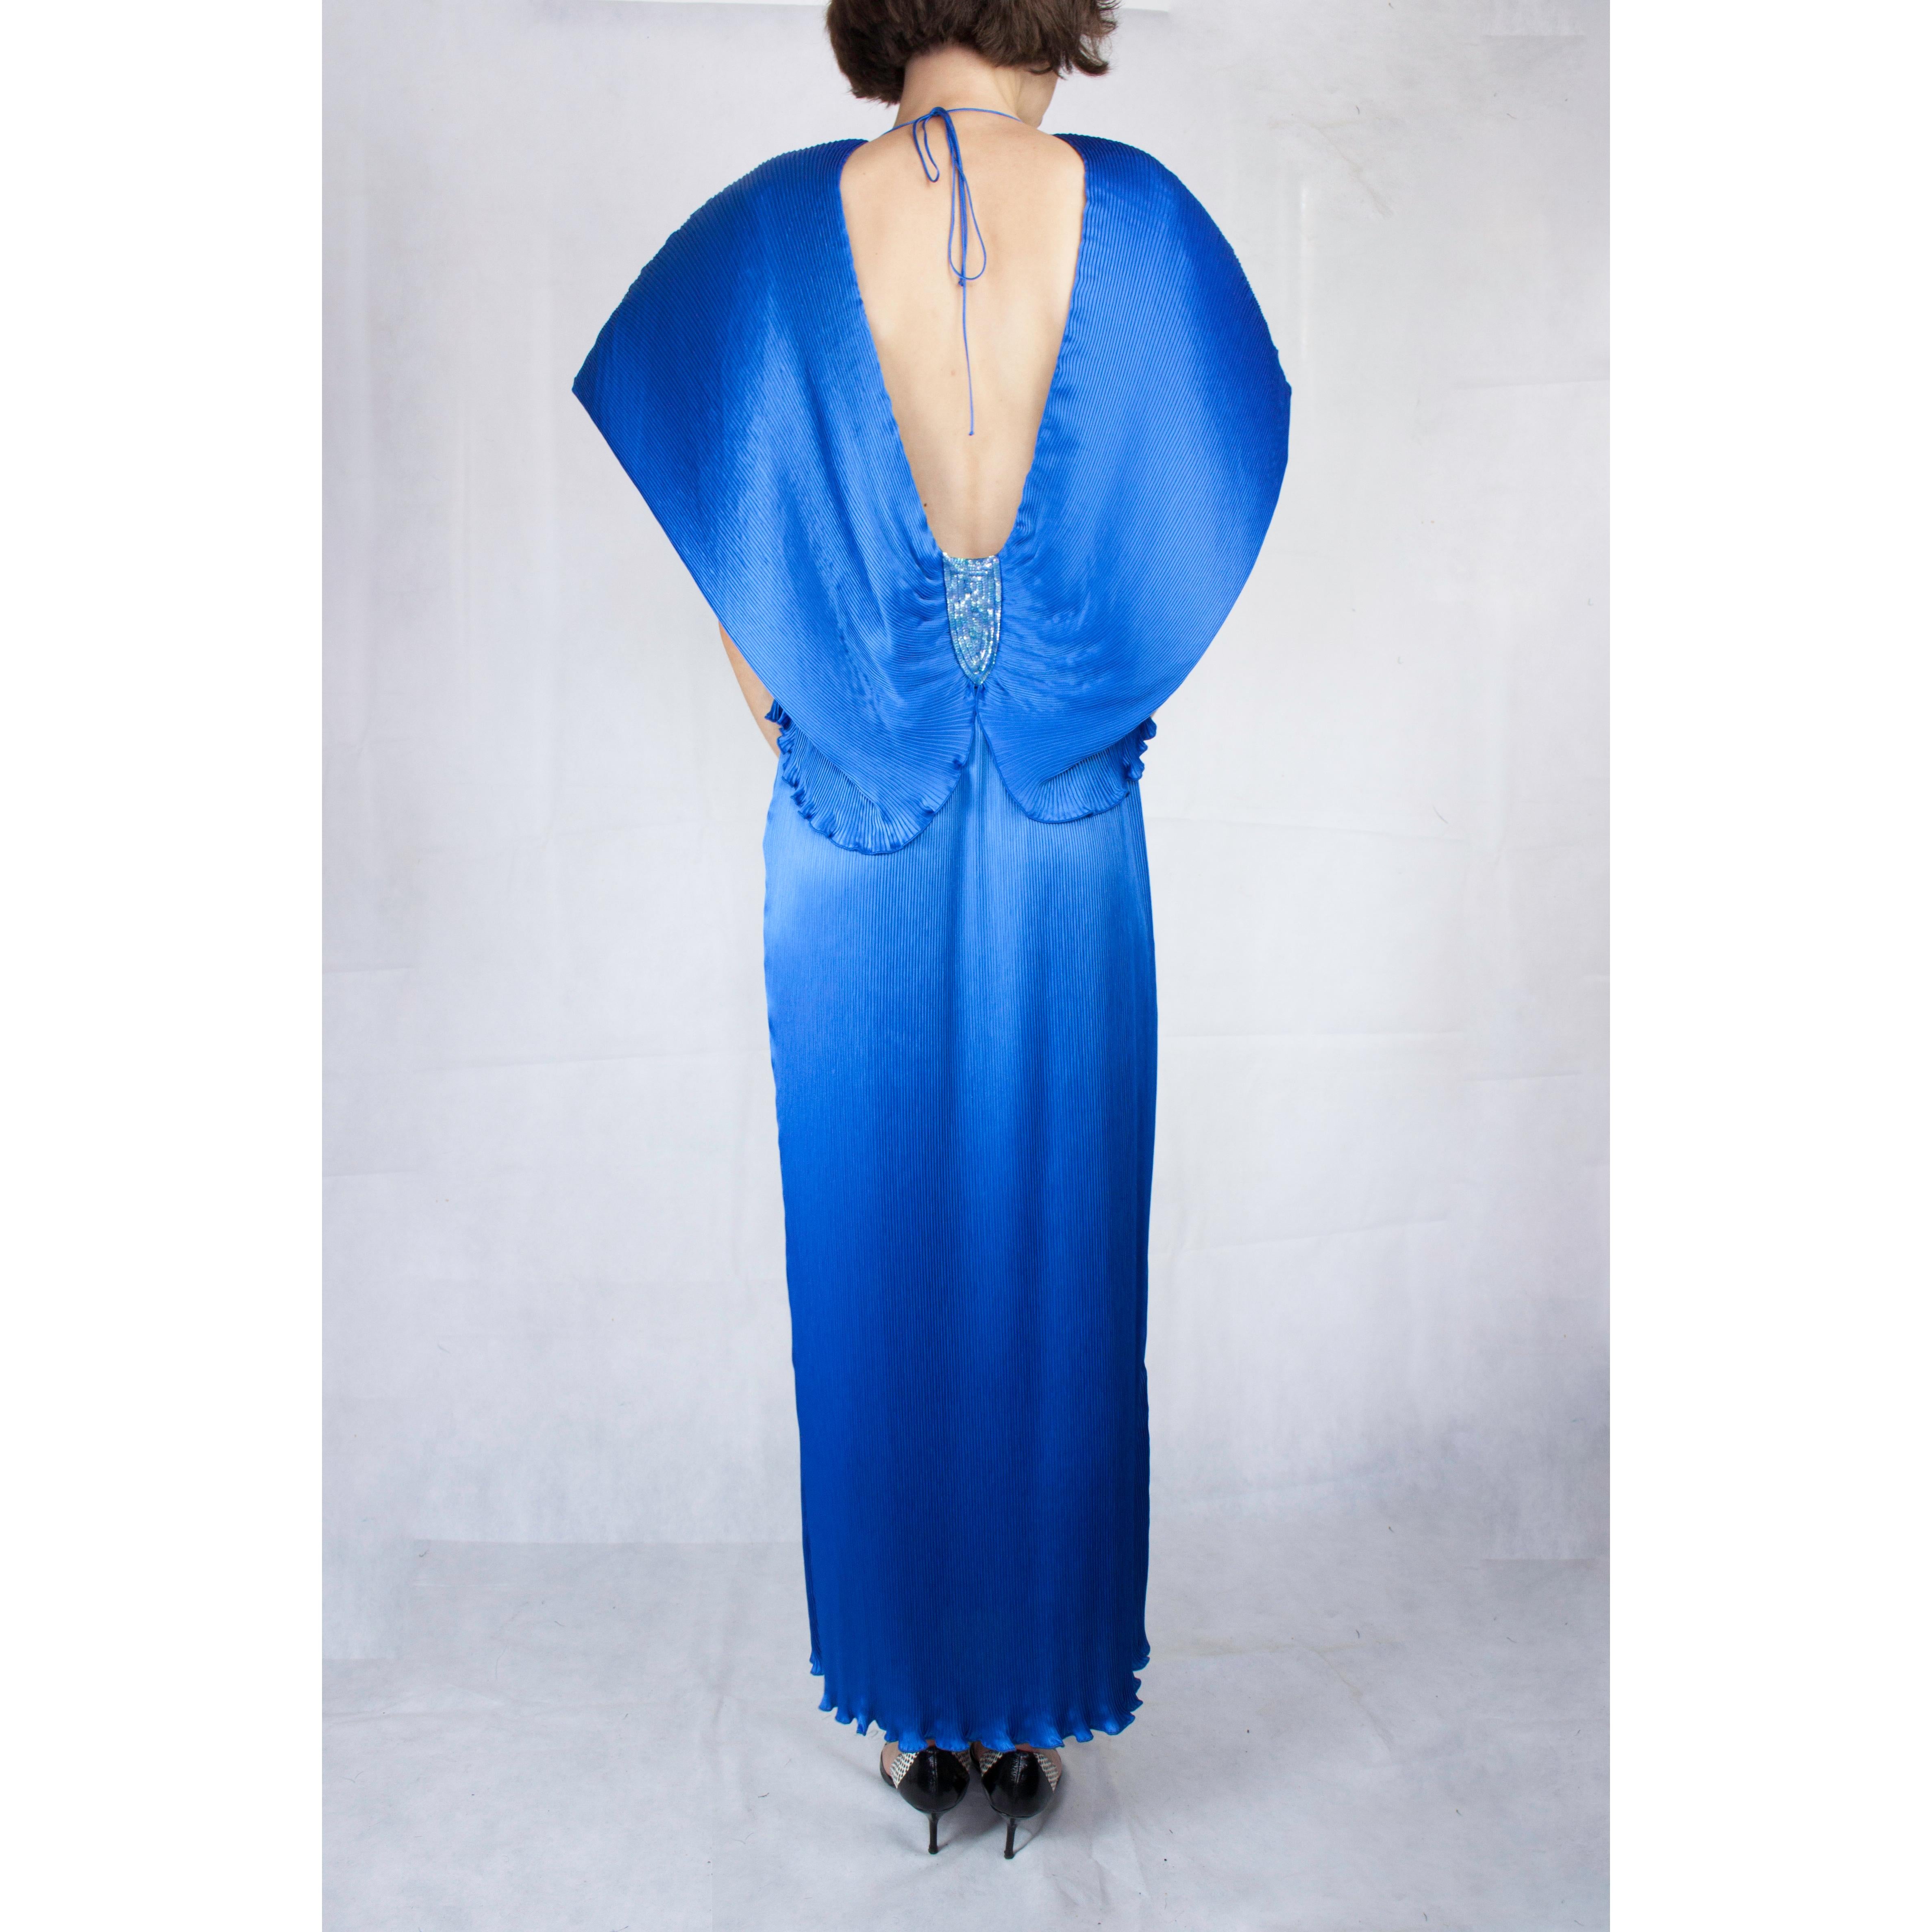 Yuki Torimaru pleated columnar evening gown, Circa 1987 In Excellent Condition For Sale In London, GB